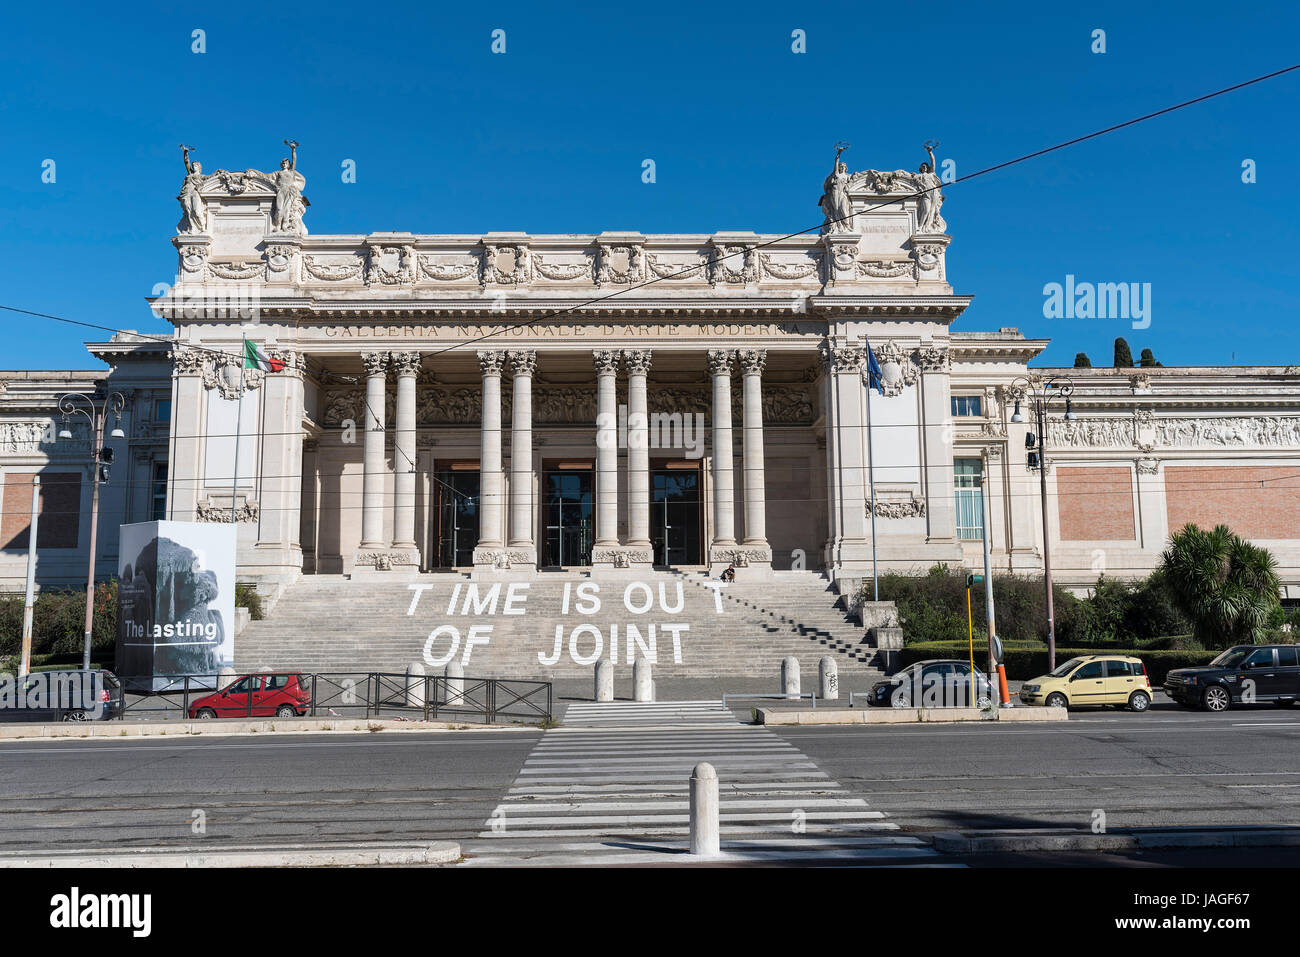 Time is out of joint exhibition, The Galleria Nazionale d'Arte Moderna, Rome, Italy Stock Photo